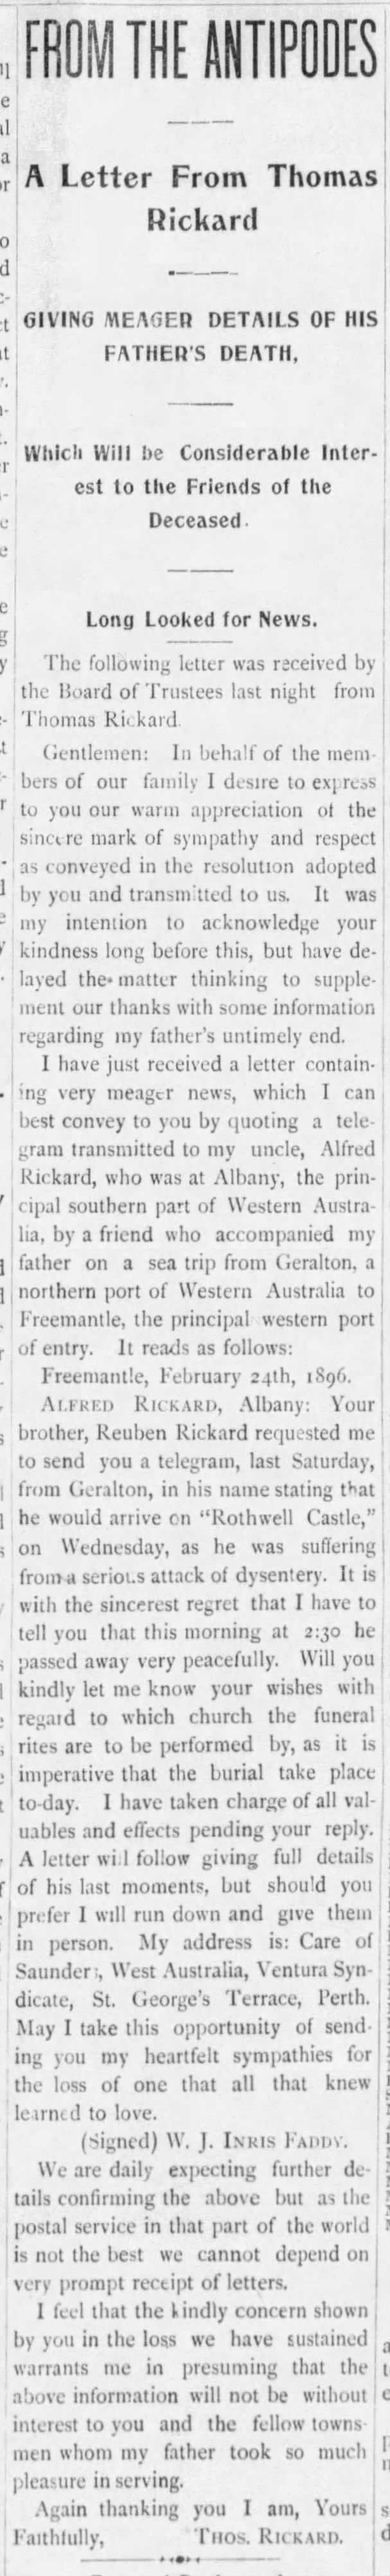 From the Antipodes, A Letter from Thomas Rickard